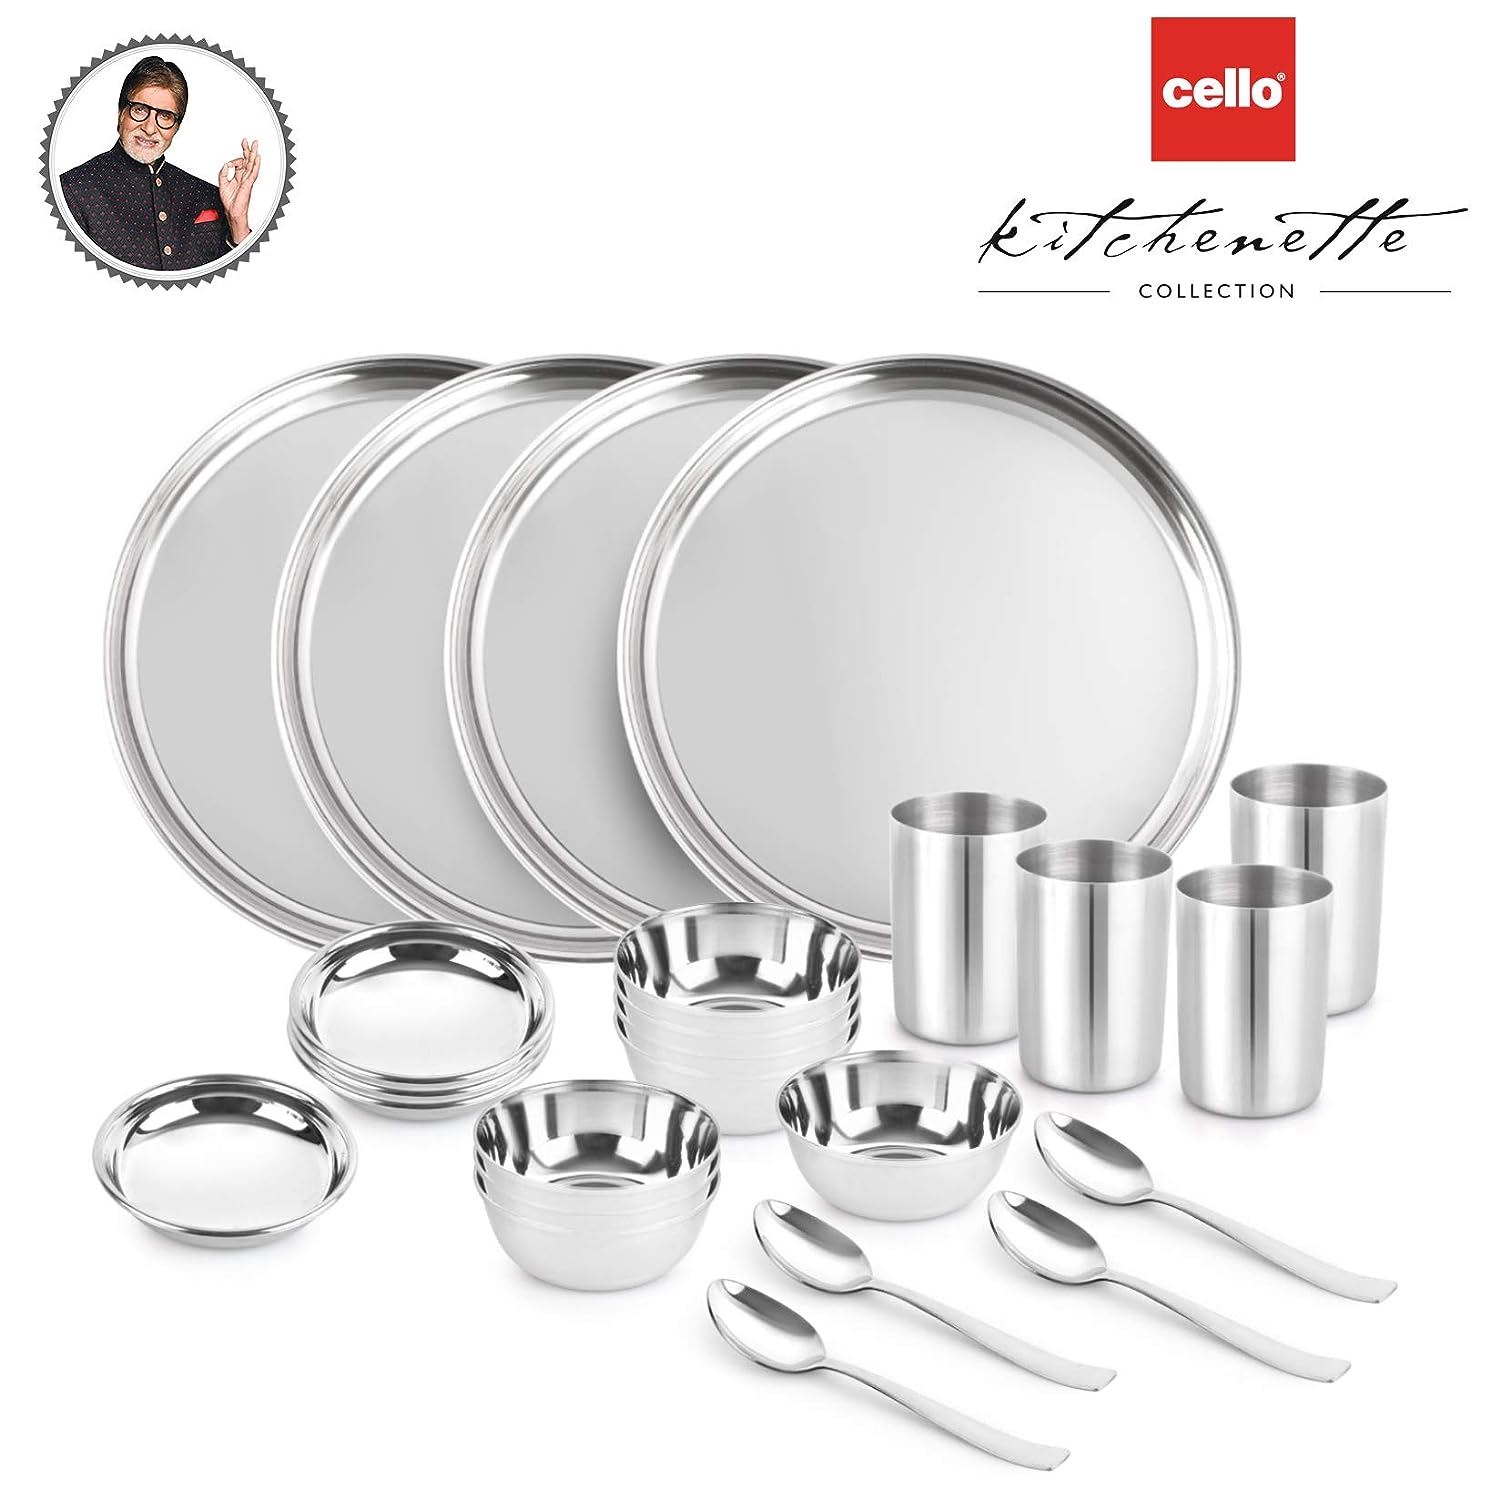 A durable 24-piece stainless steel dinner set for a family of 4